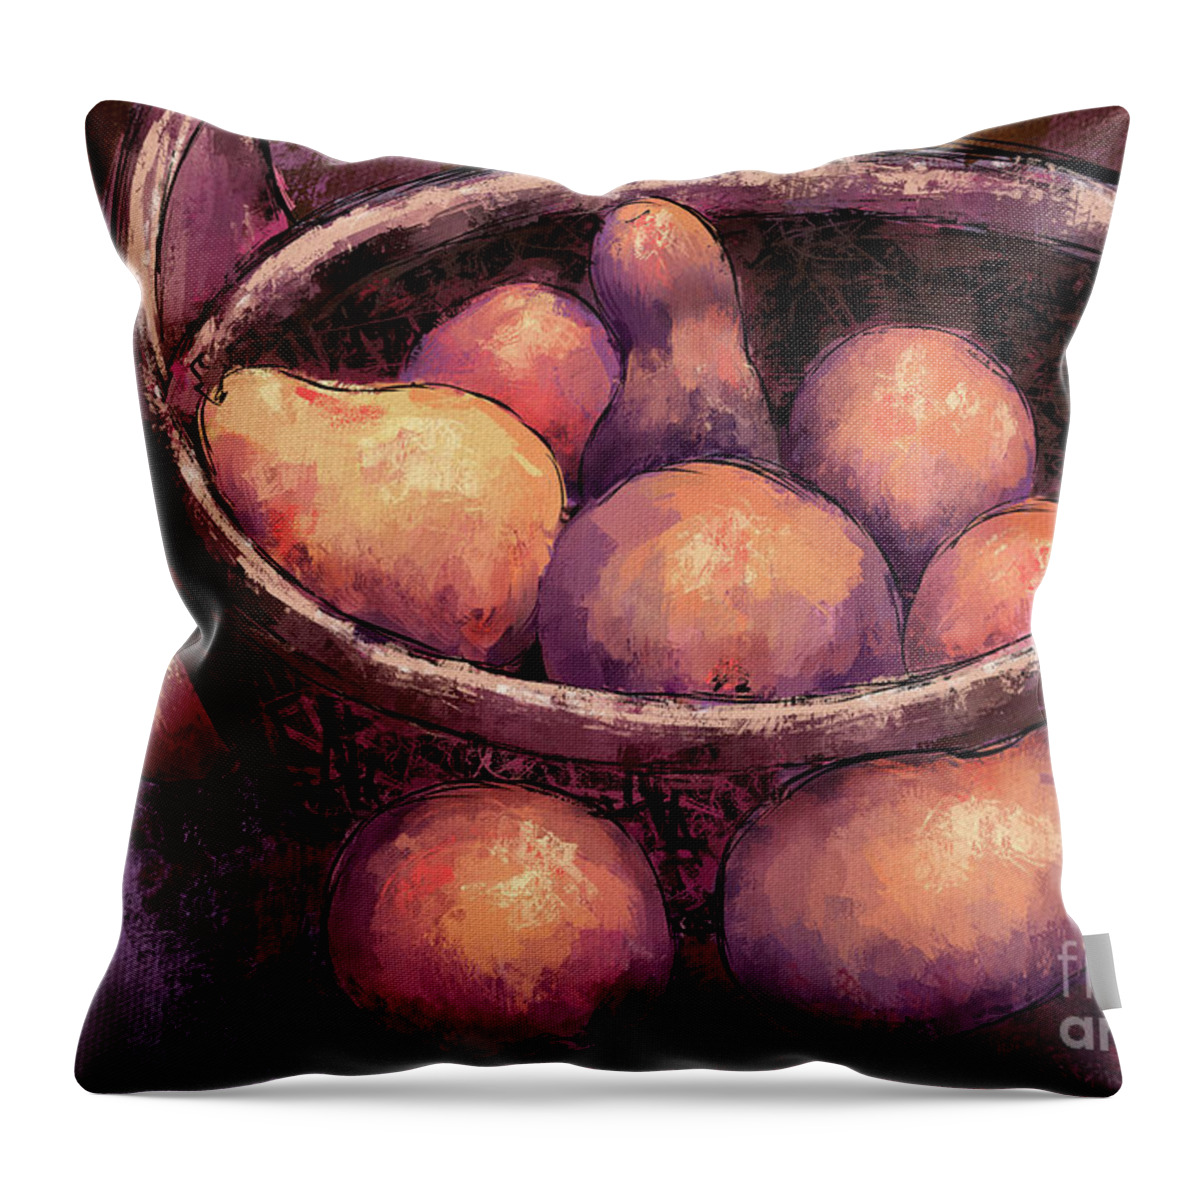 Still Life Throw Pillow featuring the digital art The Ordinary by Lois Bryan